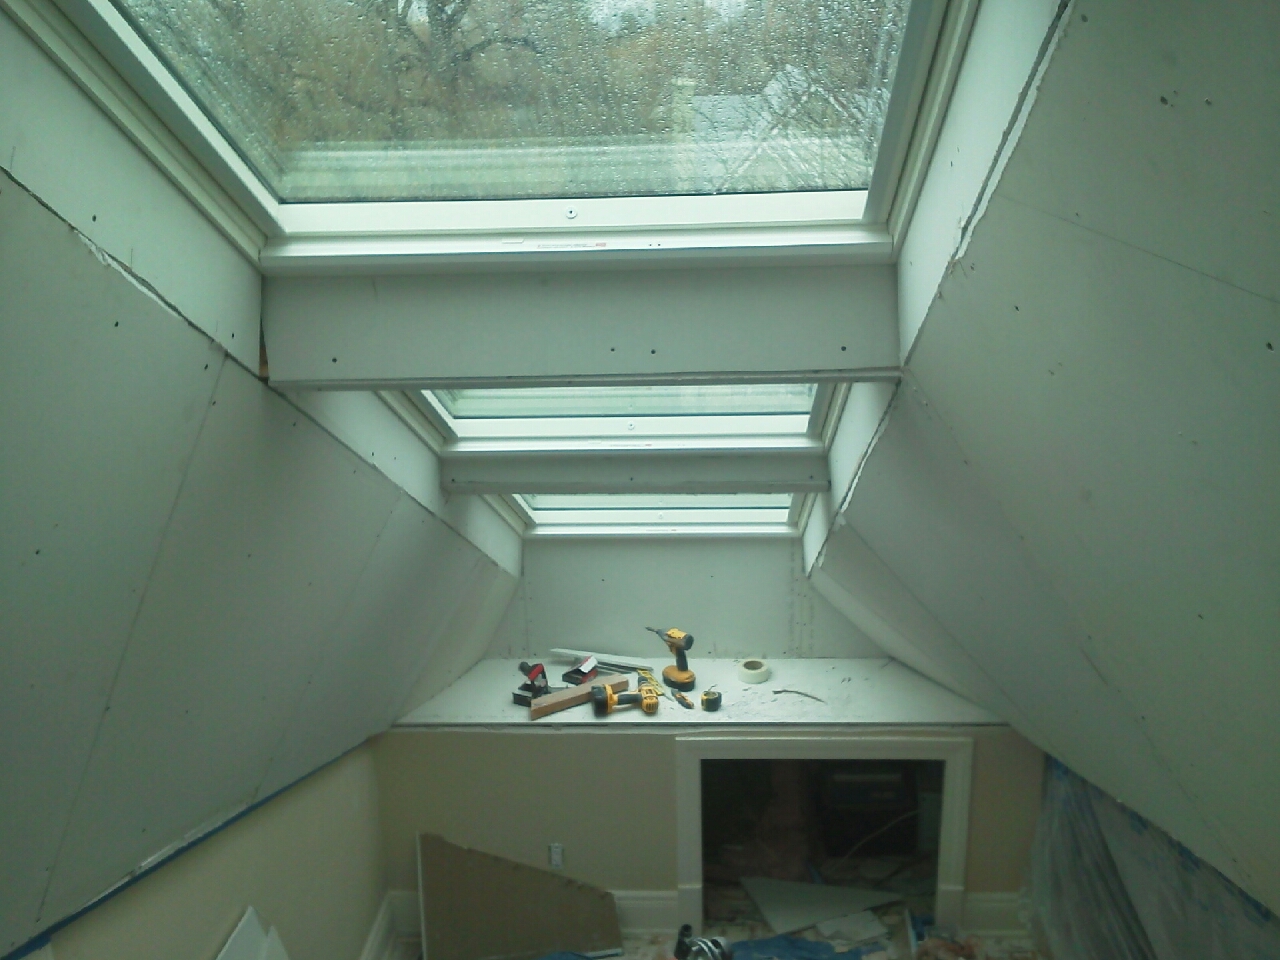 Drywall Flare-7 Skylights installed in attic